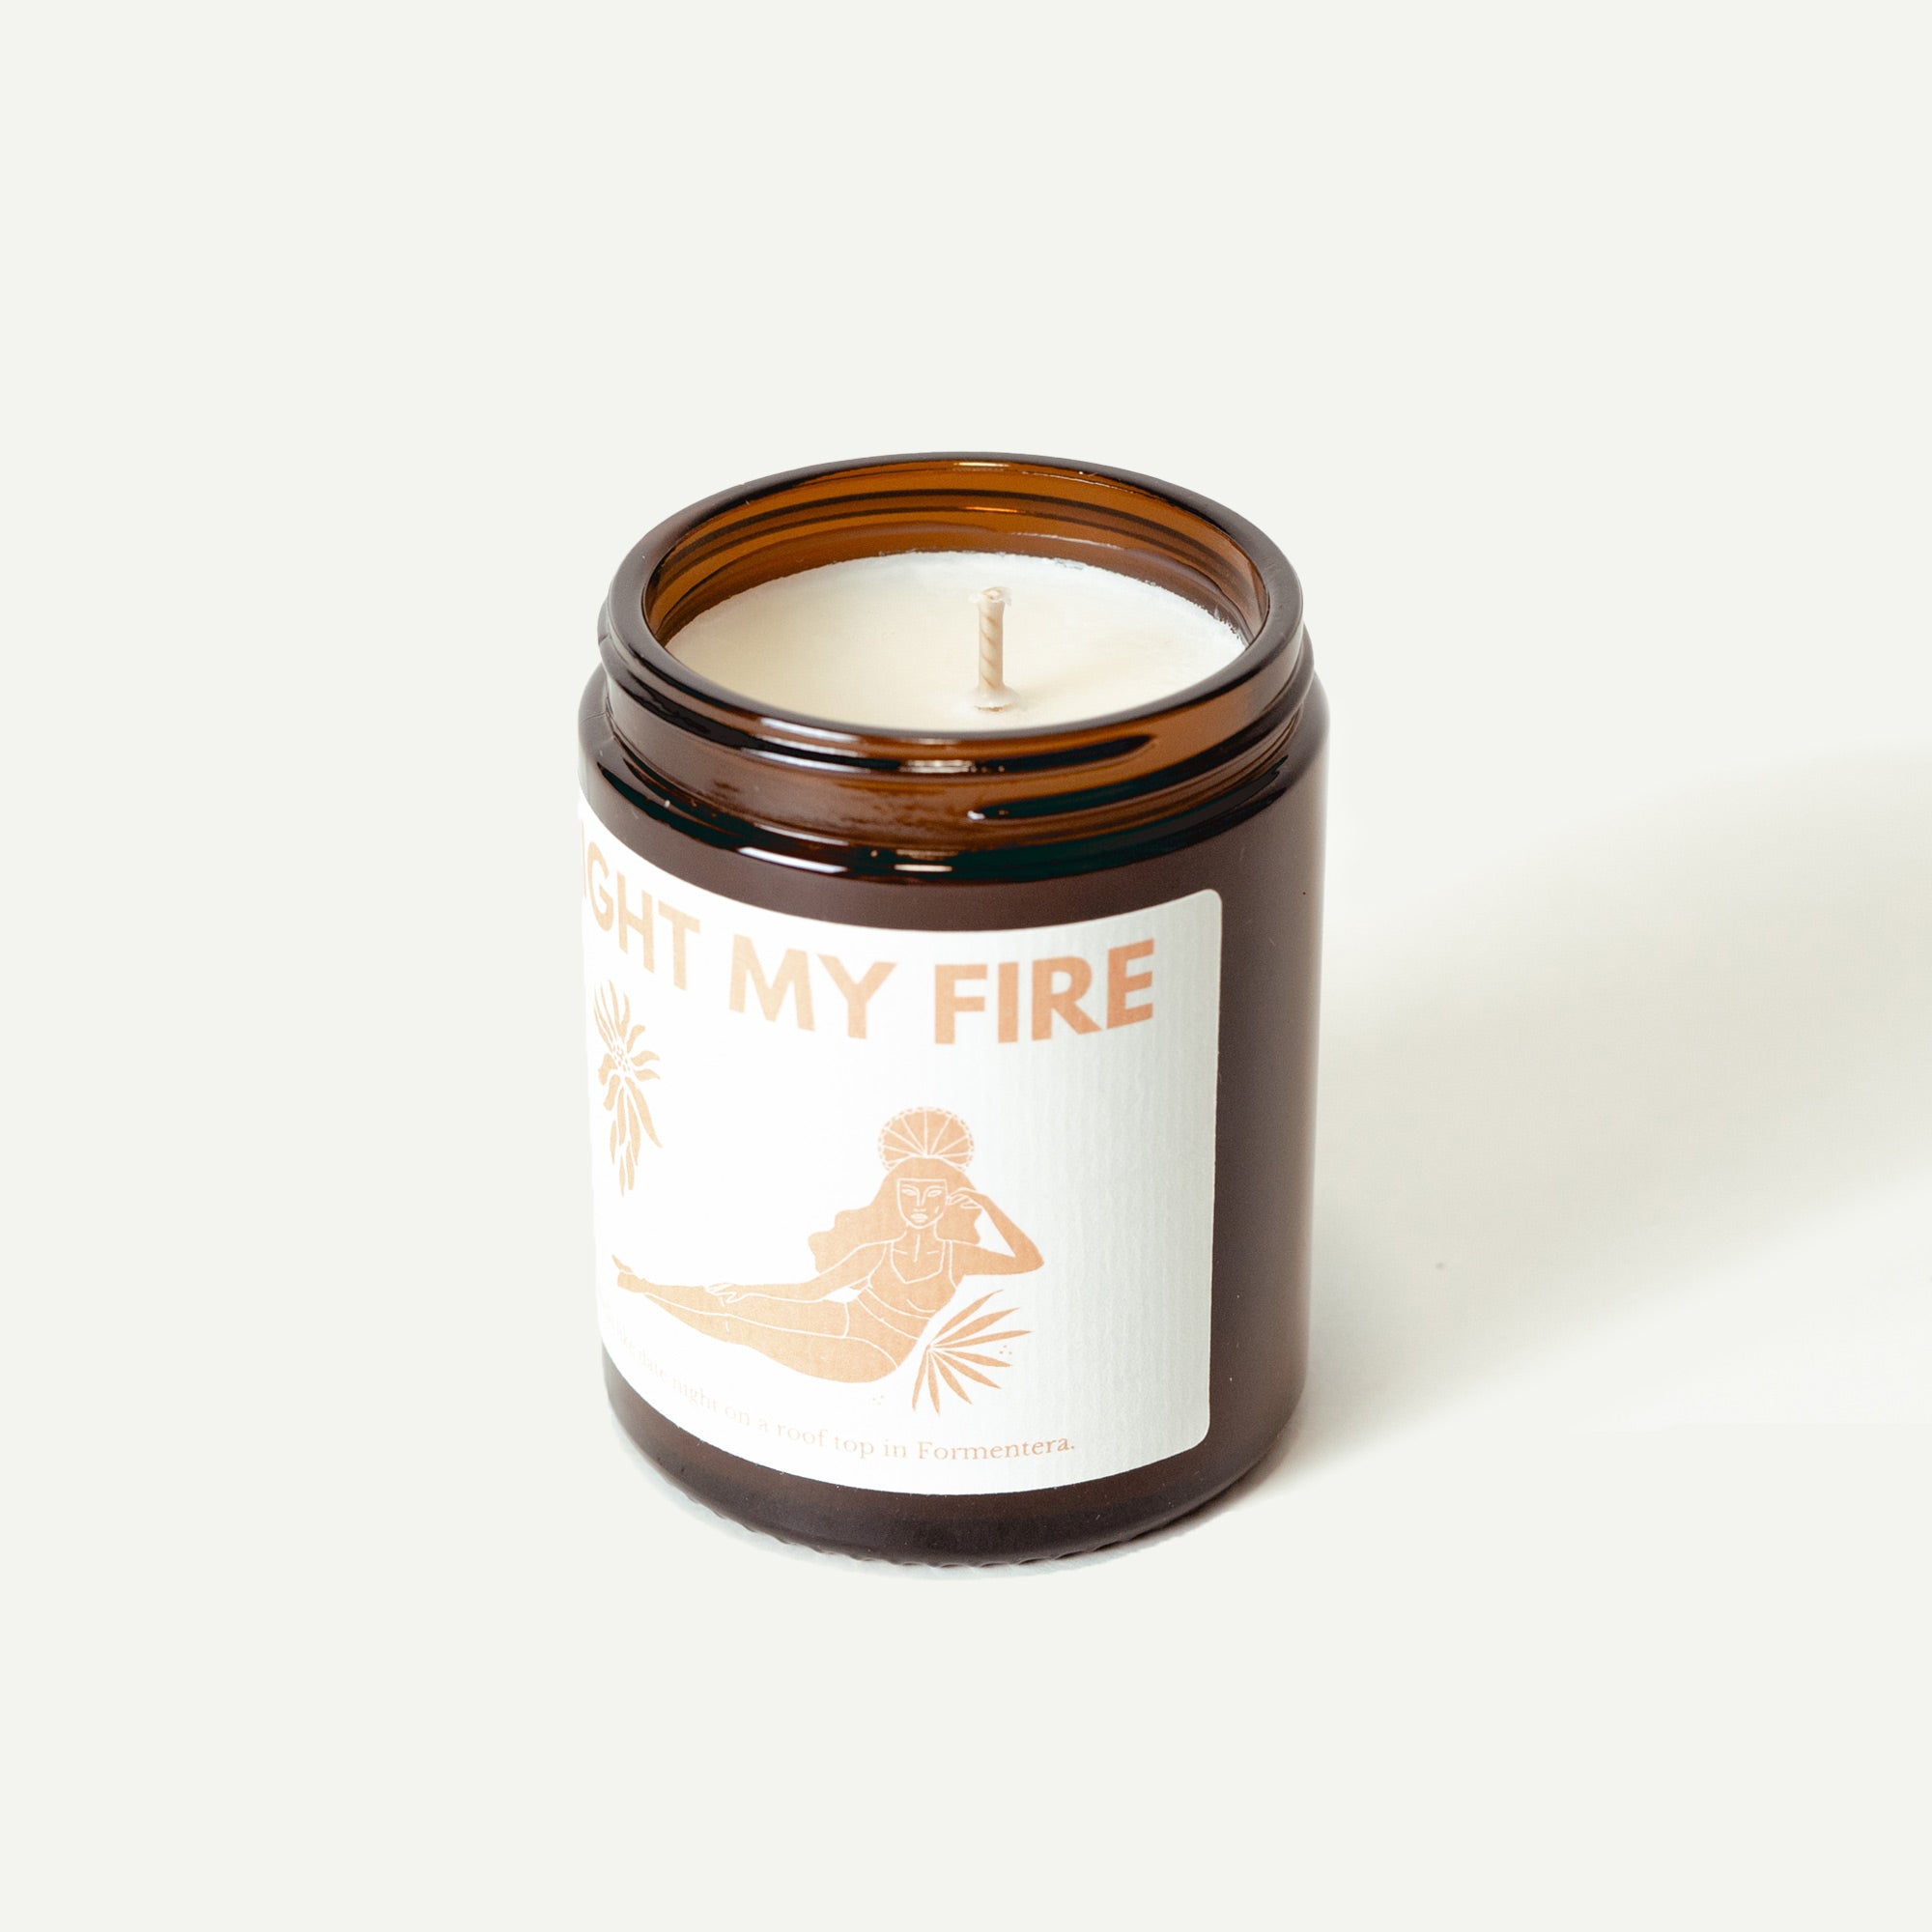 Les Boujies Light My Fire Soy Wax Candle